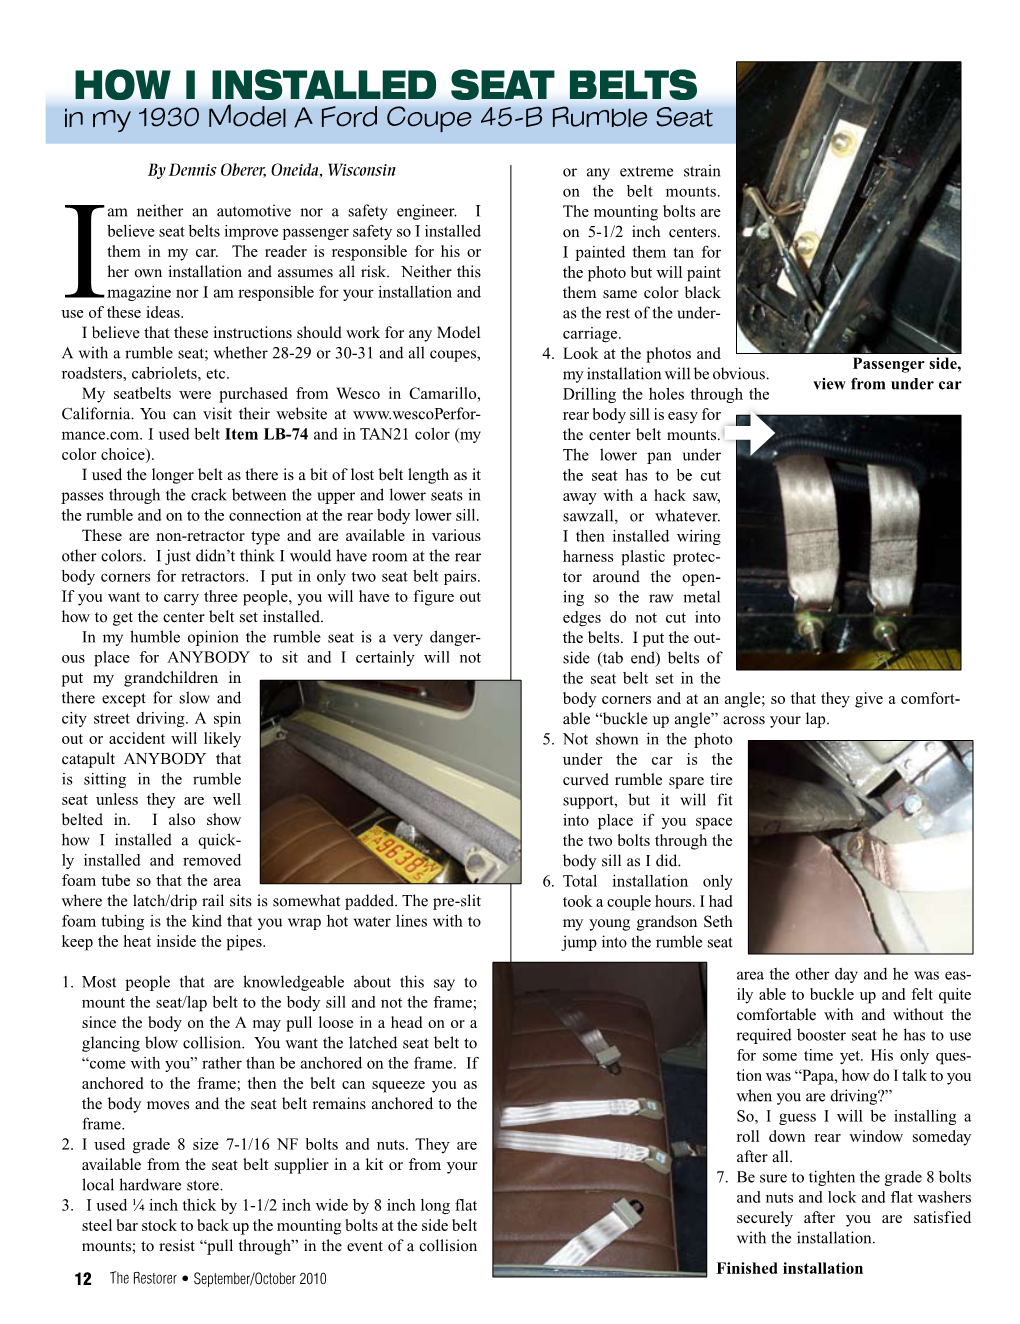 How I Installed Seat Belts in My 1930 Model a Ford Coupe 45-B Rumble Seat